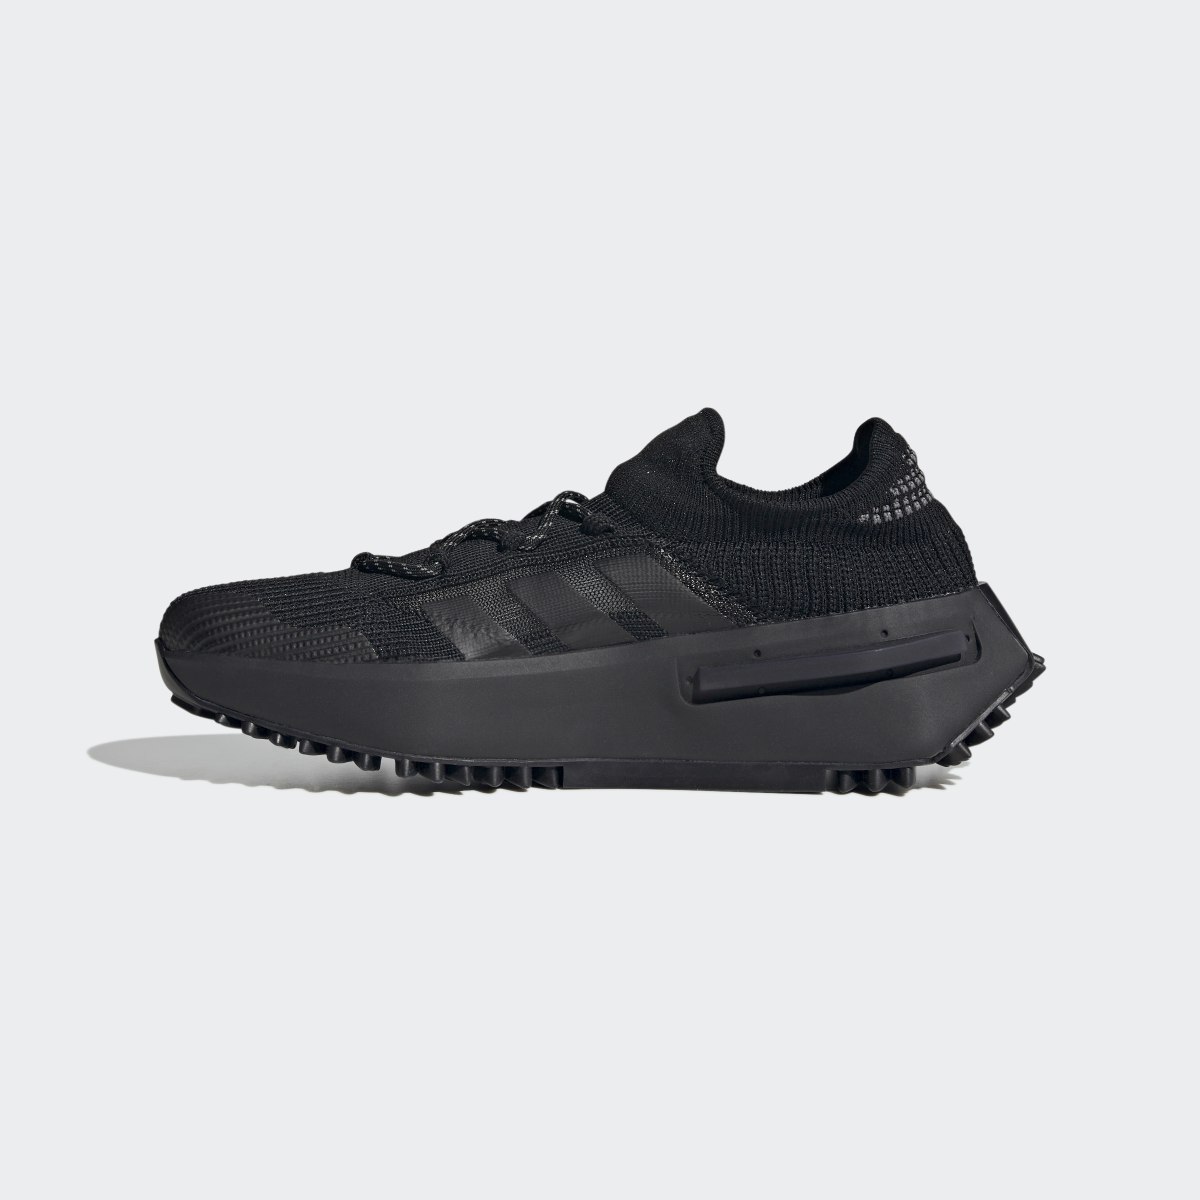 Adidas NMD_S1 Shoes. 7